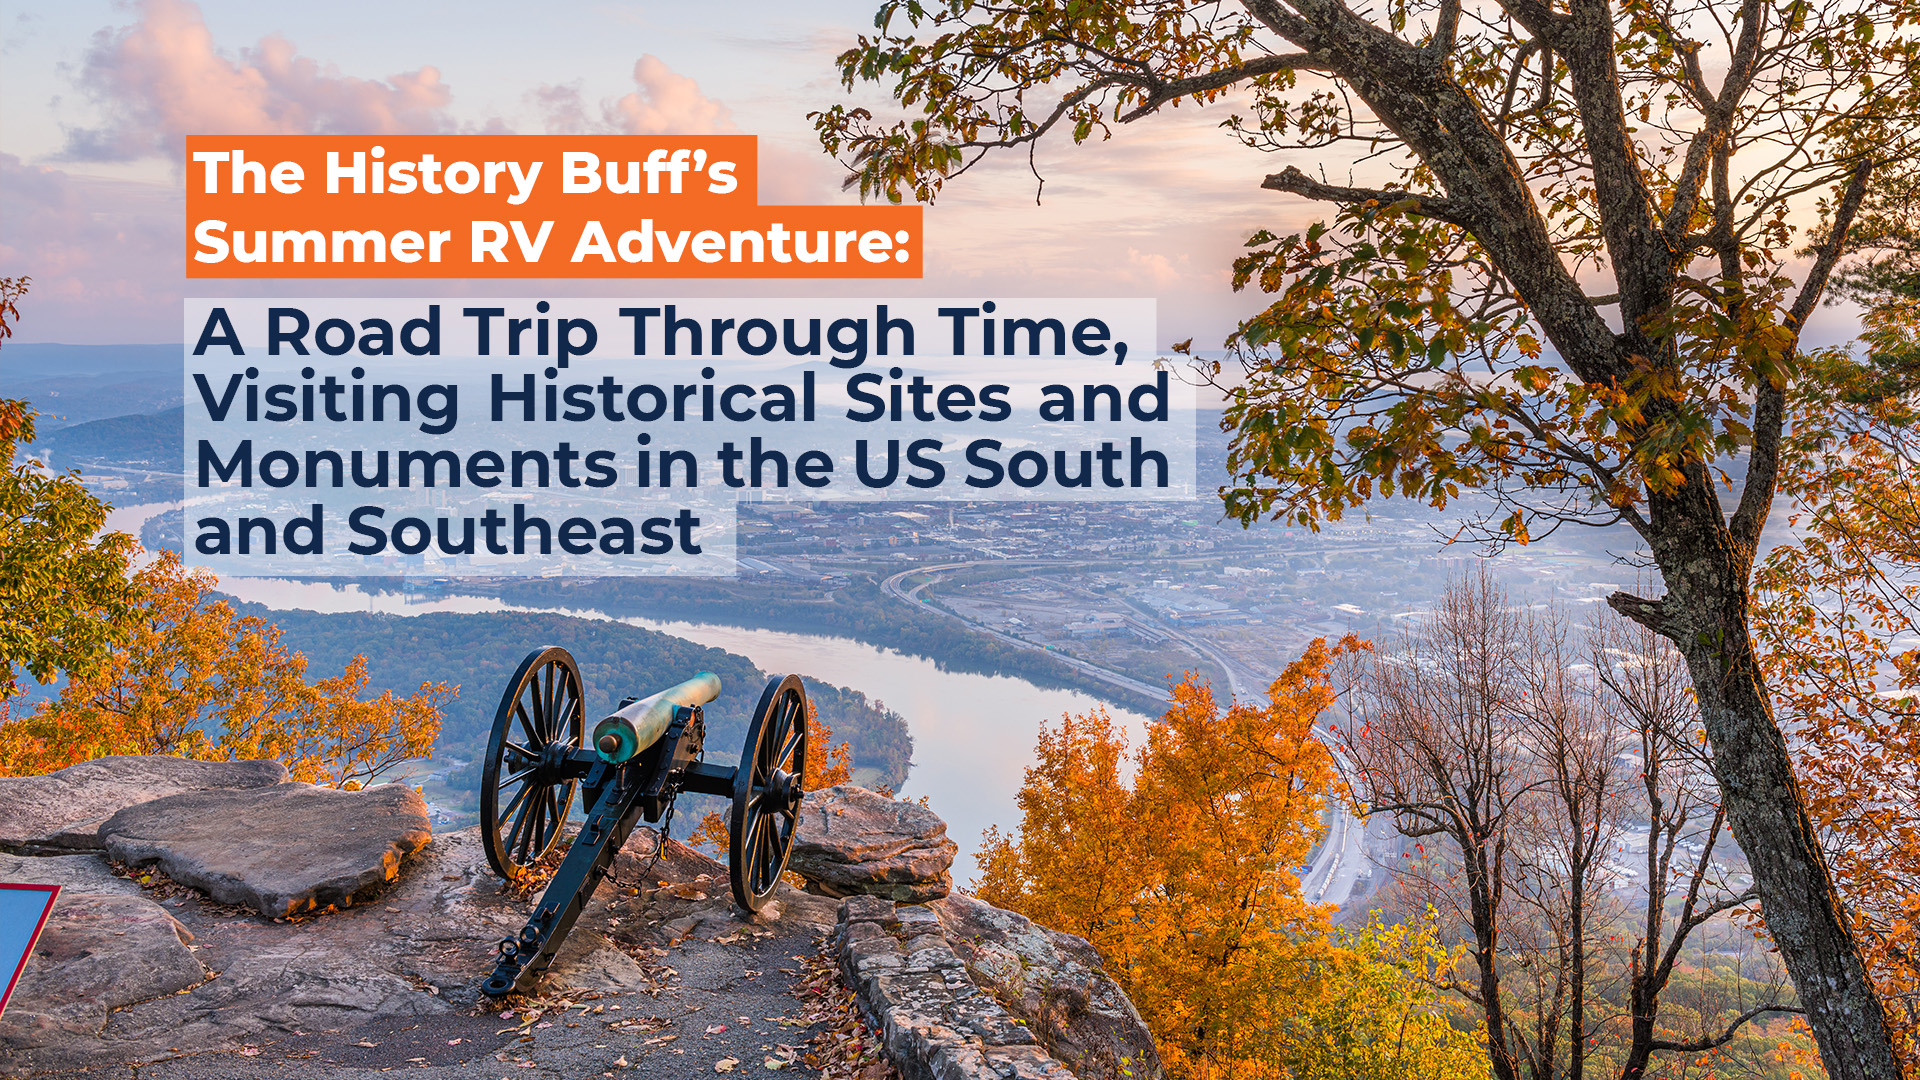 The History Buff’s Summer RV Adventure: A Road Trip Through Time, Visiting Historical Sites and Monuments in the US South and Southeast